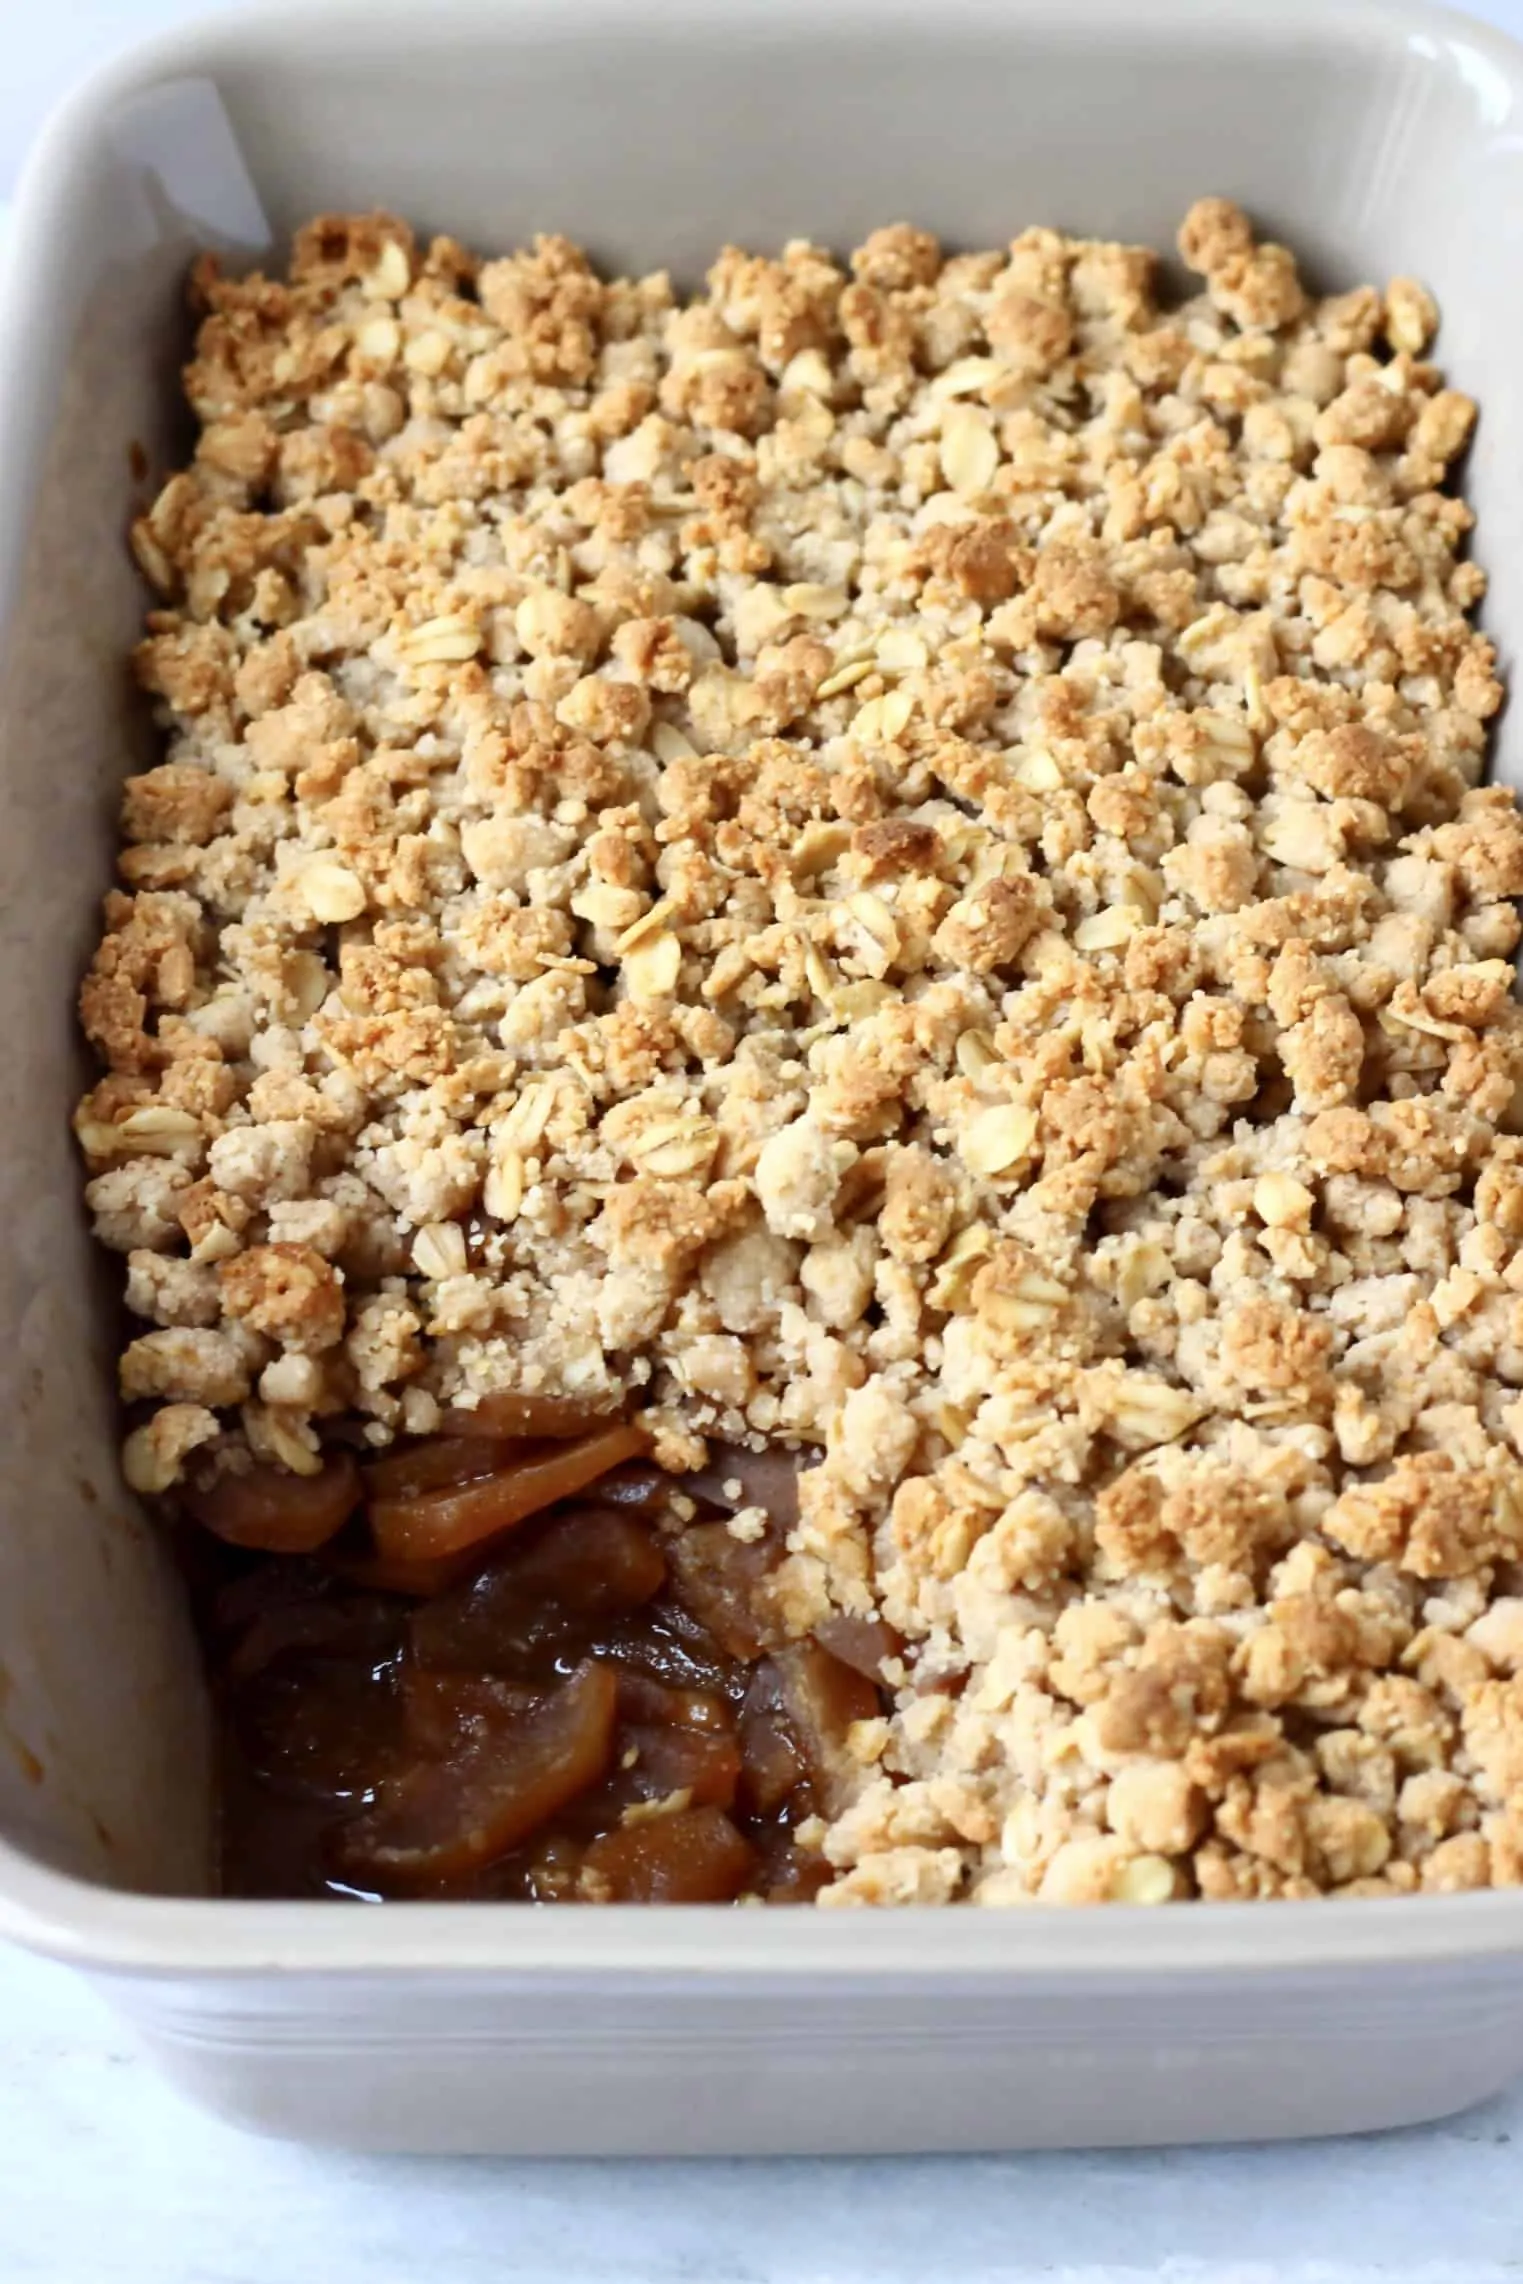 Gluten-free vegan apple crumble in a rectangular baking dish with a portion cut out